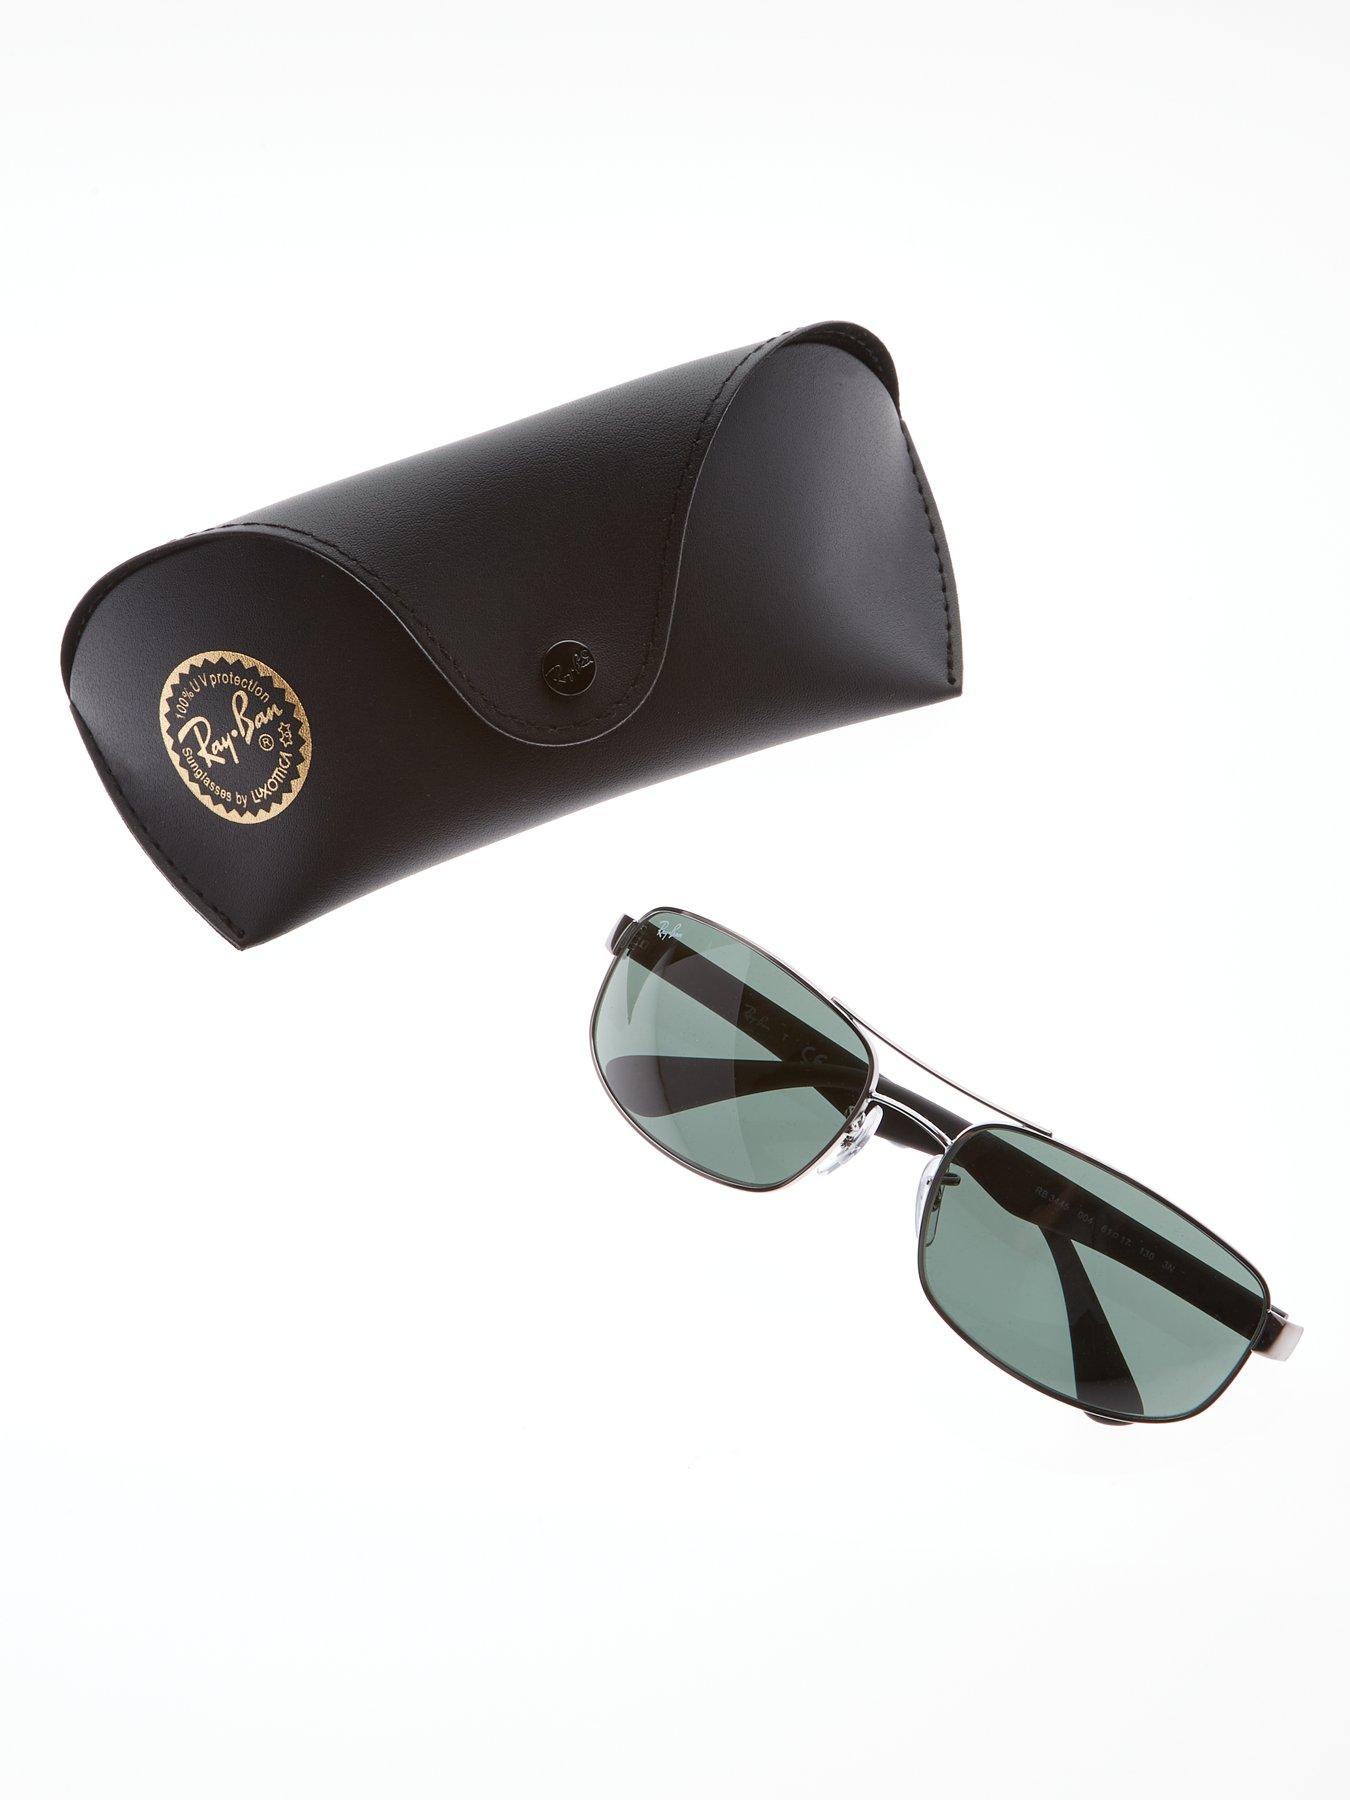 Ray-Ban's sunglasses are popular for a reason